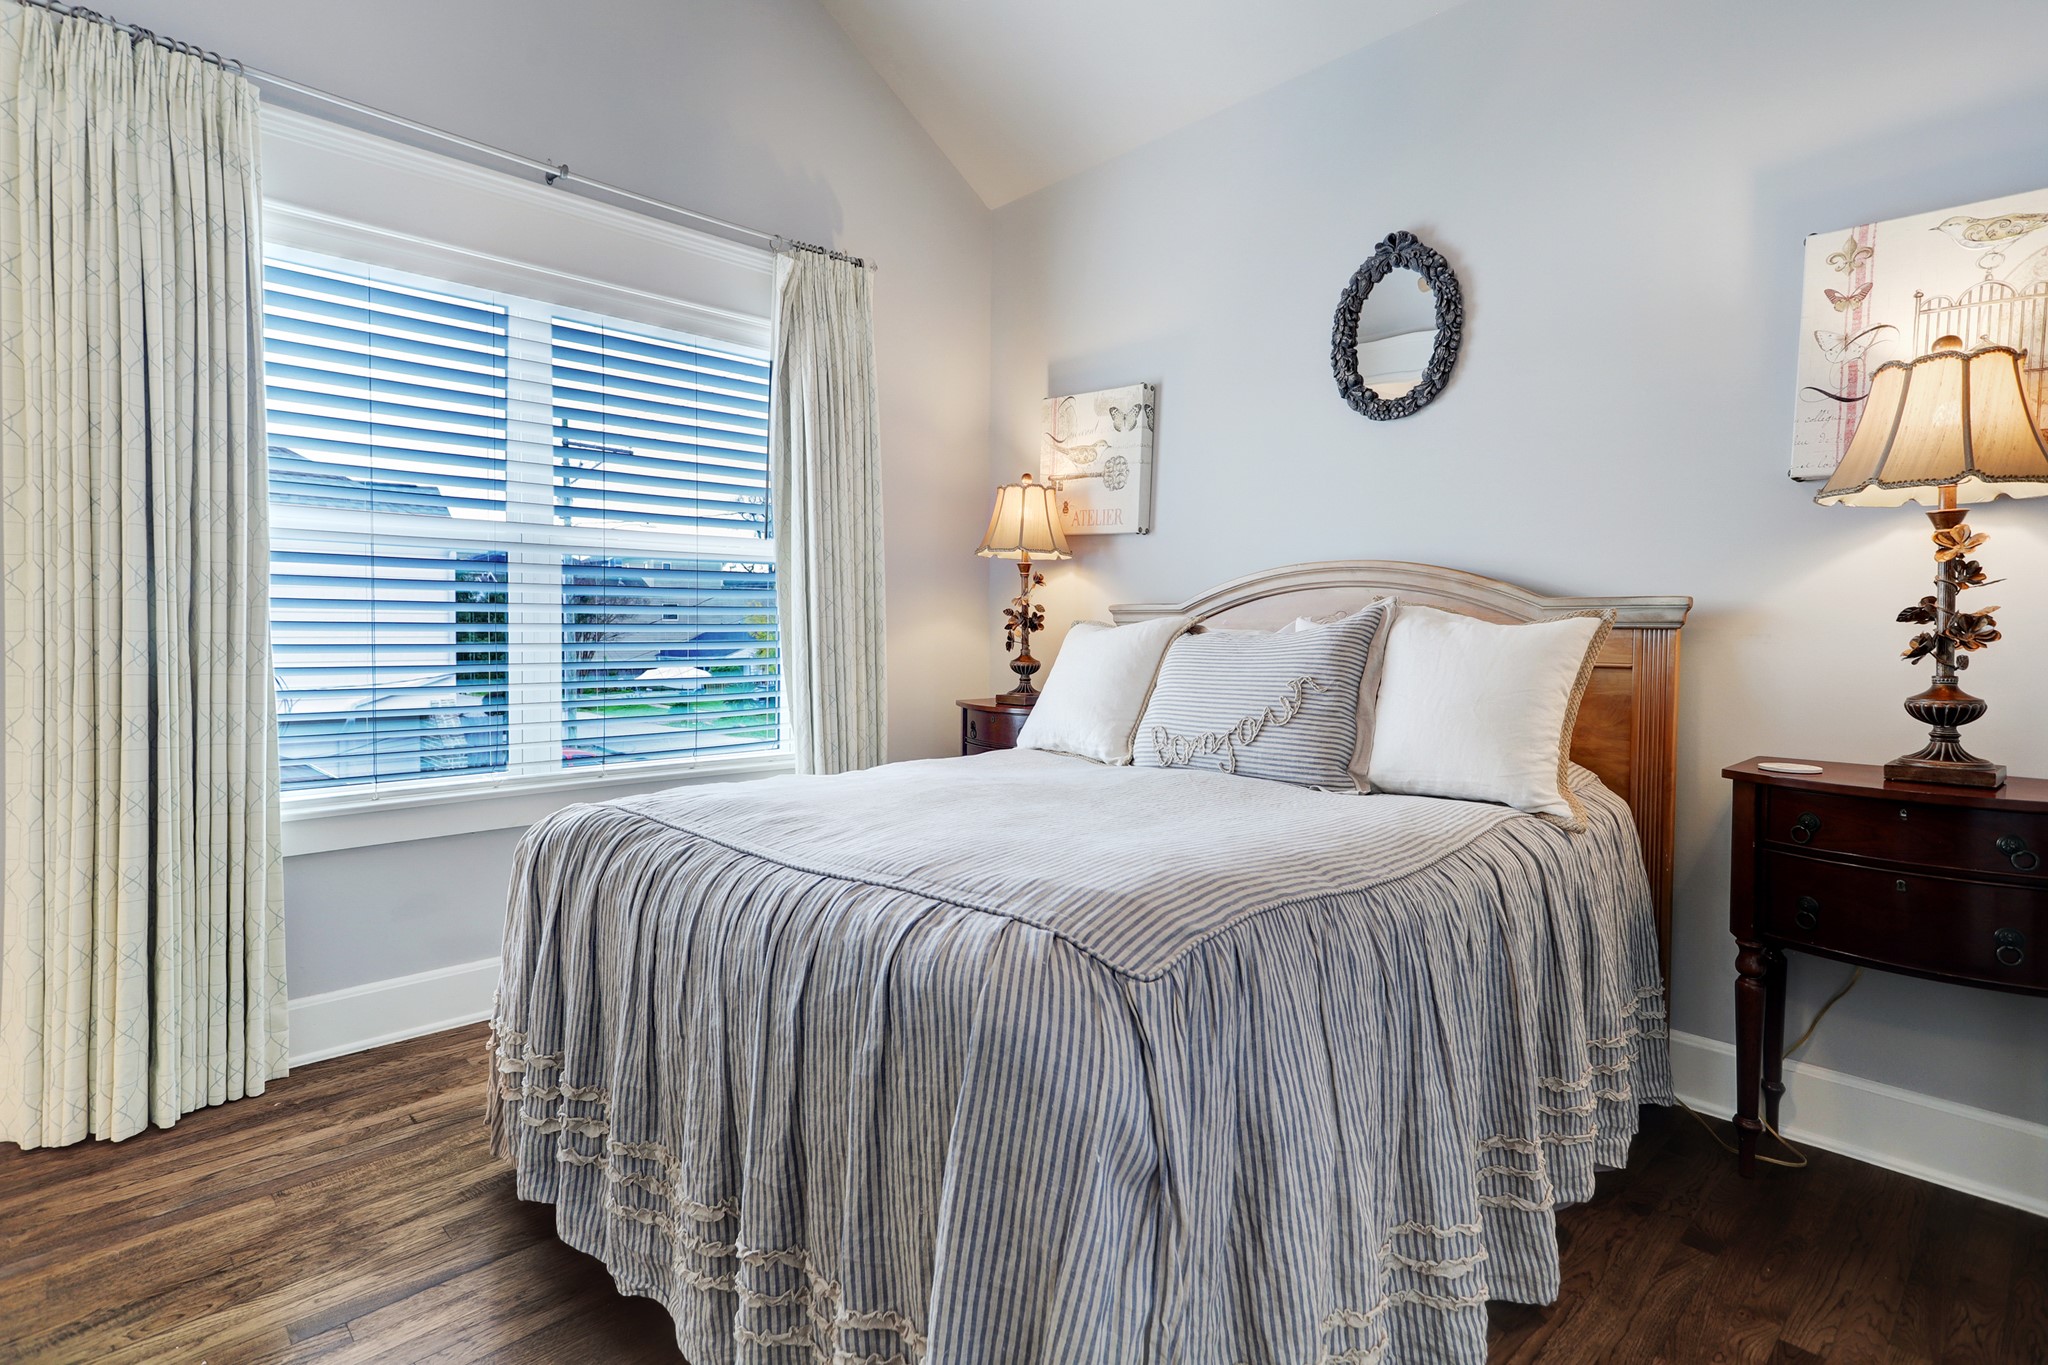 This secondary bedroom features a walk-in closet and en-suite bathroom.